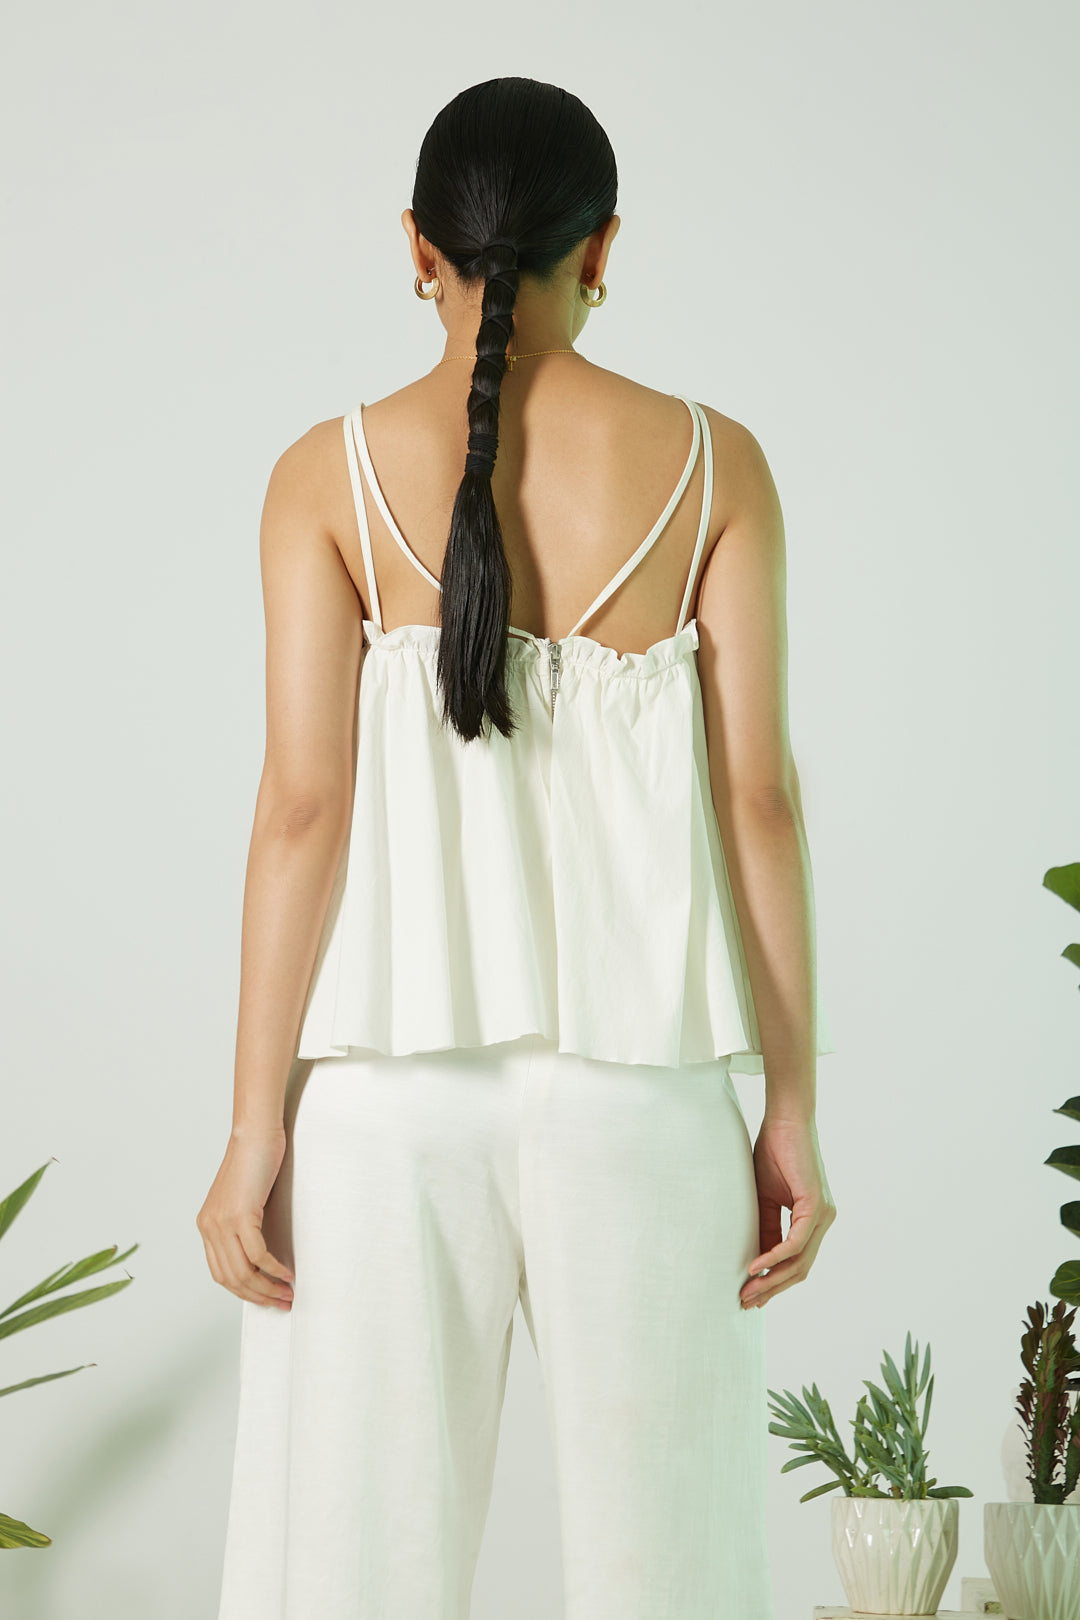 THE CHALKY WHITE BRALETTE CO-ORD